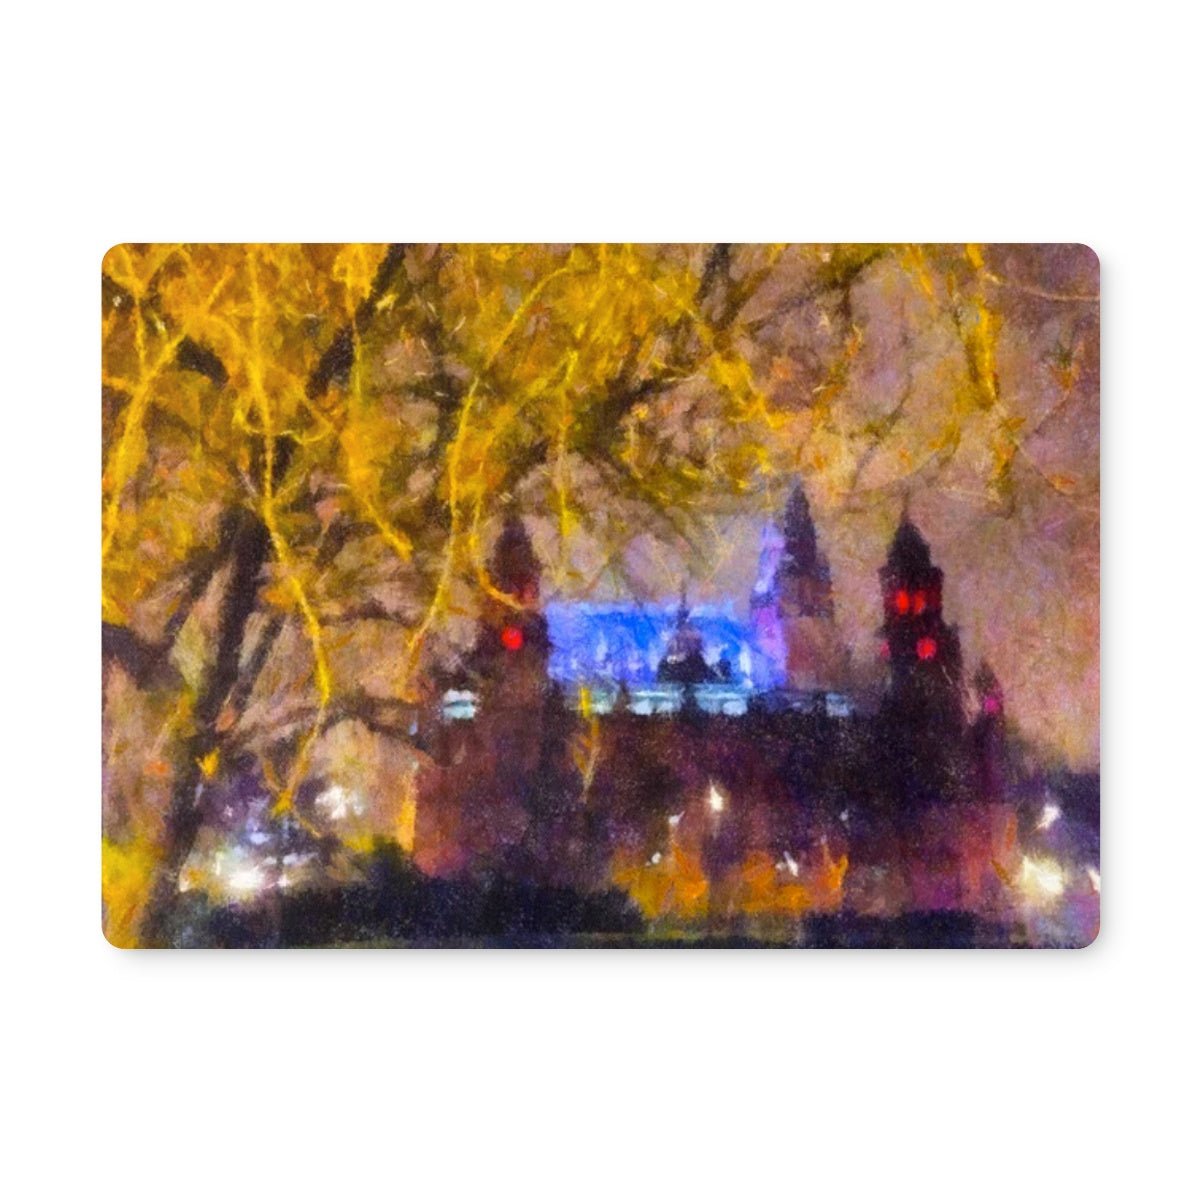 Kelvingrove Nights Glasgow Art Gifts Placemat-Placemats-Edinburgh & Glasgow Art Gallery-2 Placemats-Paintings, Prints, Homeware, Art Gifts From Scotland By Scottish Artist Kevin Hunter